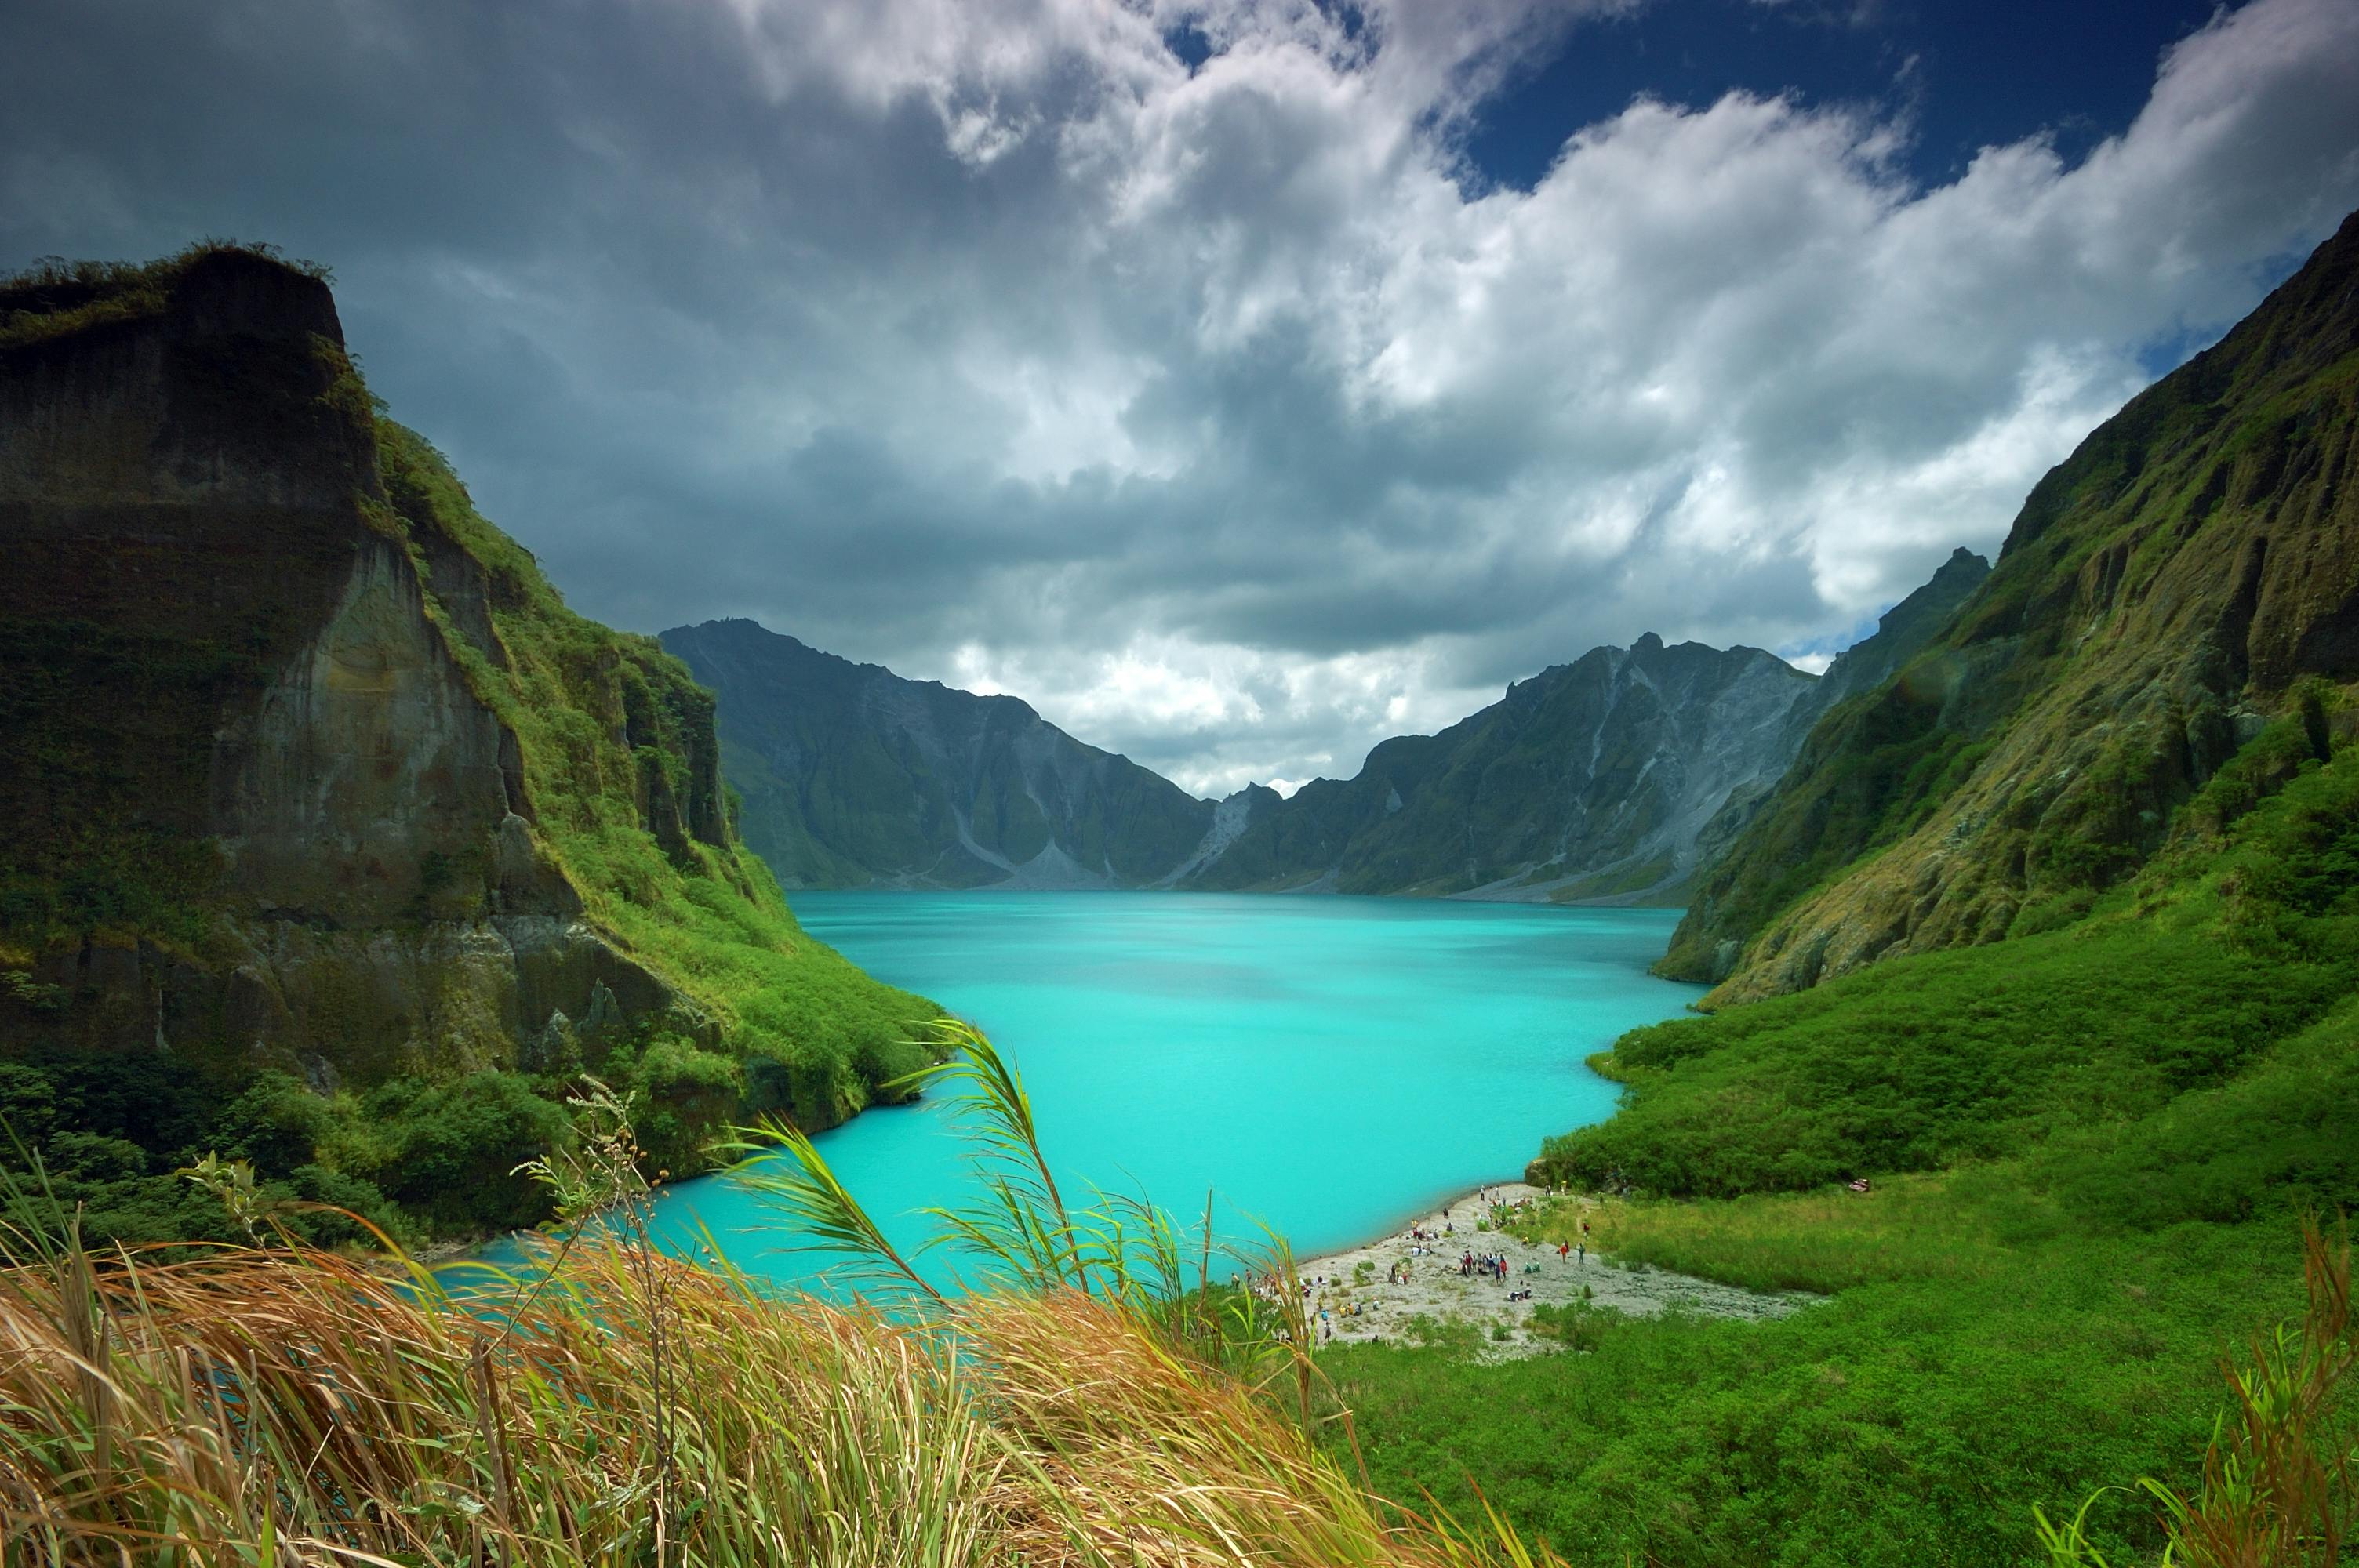 Scenic view of Mt. Pinatubo Crater Lake